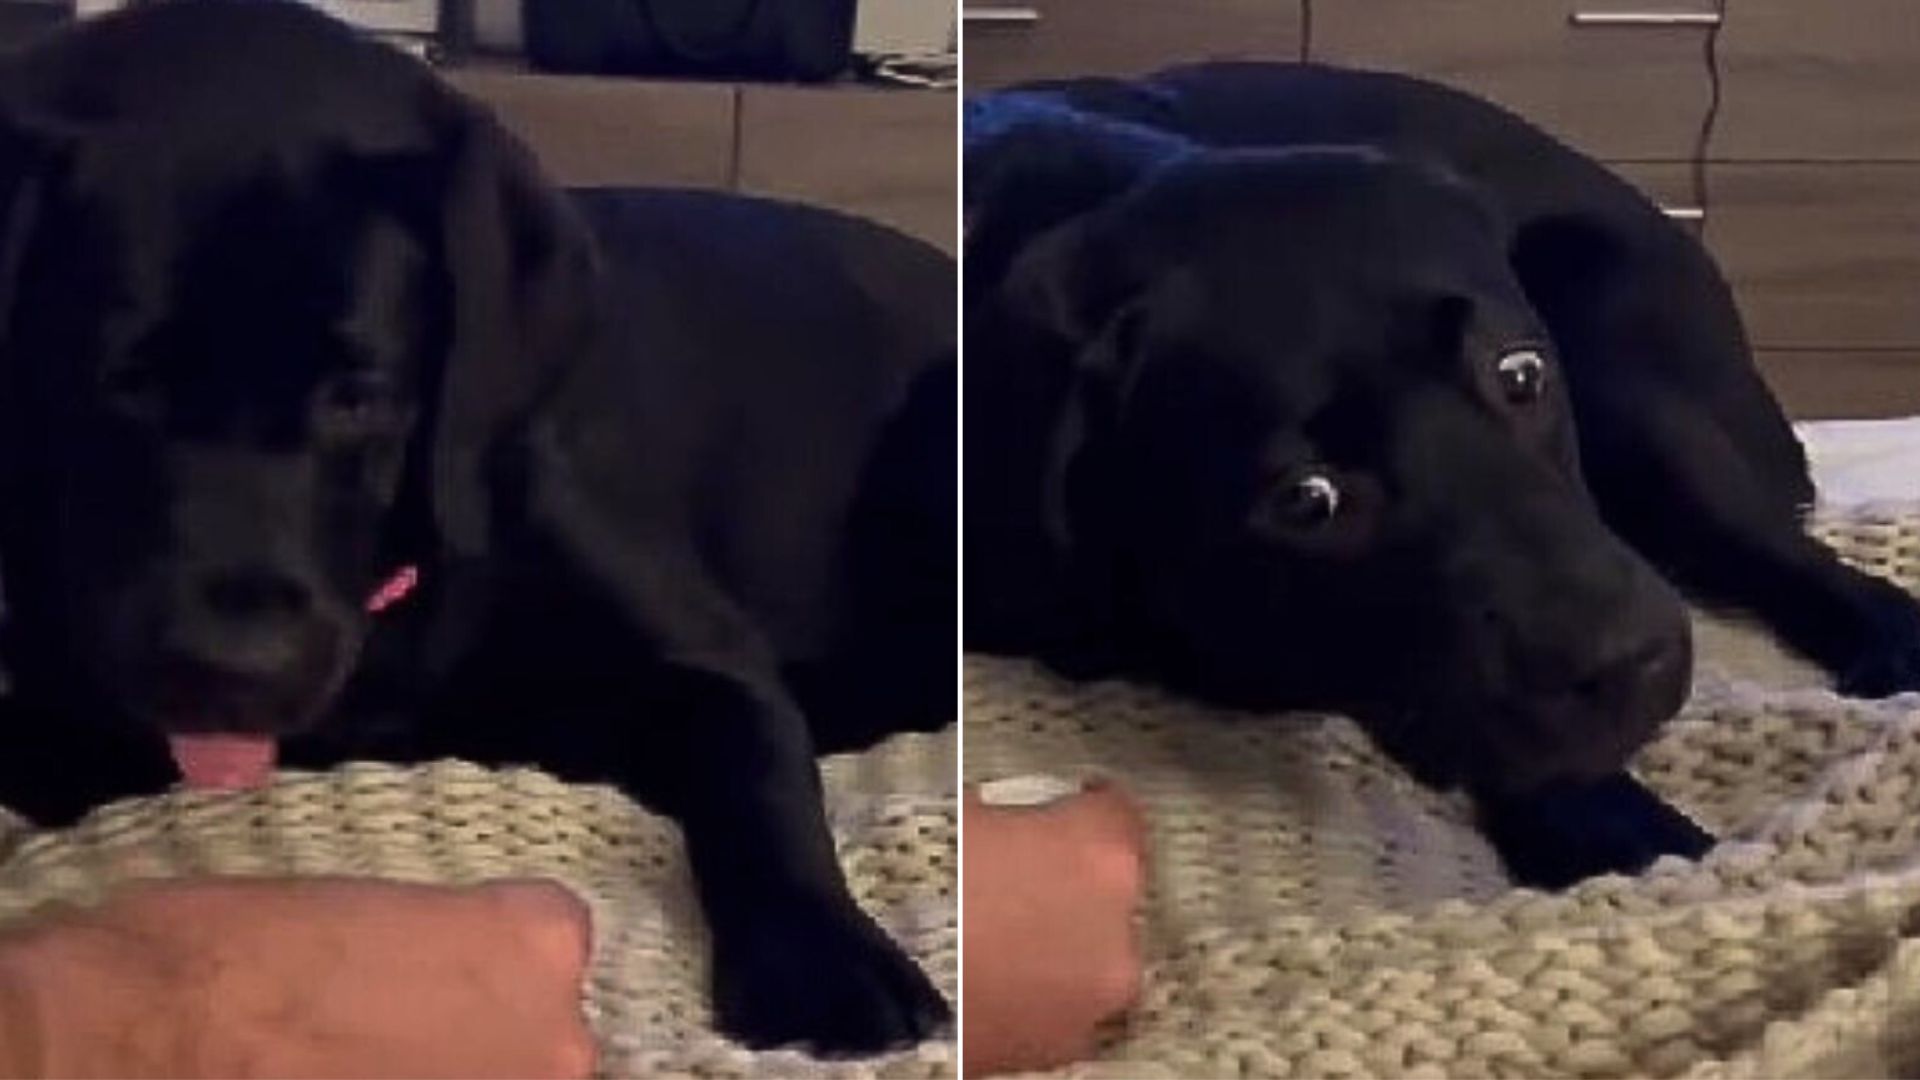 The Black Lab Wasn’t Shy About Showing Her Hilarious Reaction After Tasting Sparkling Water